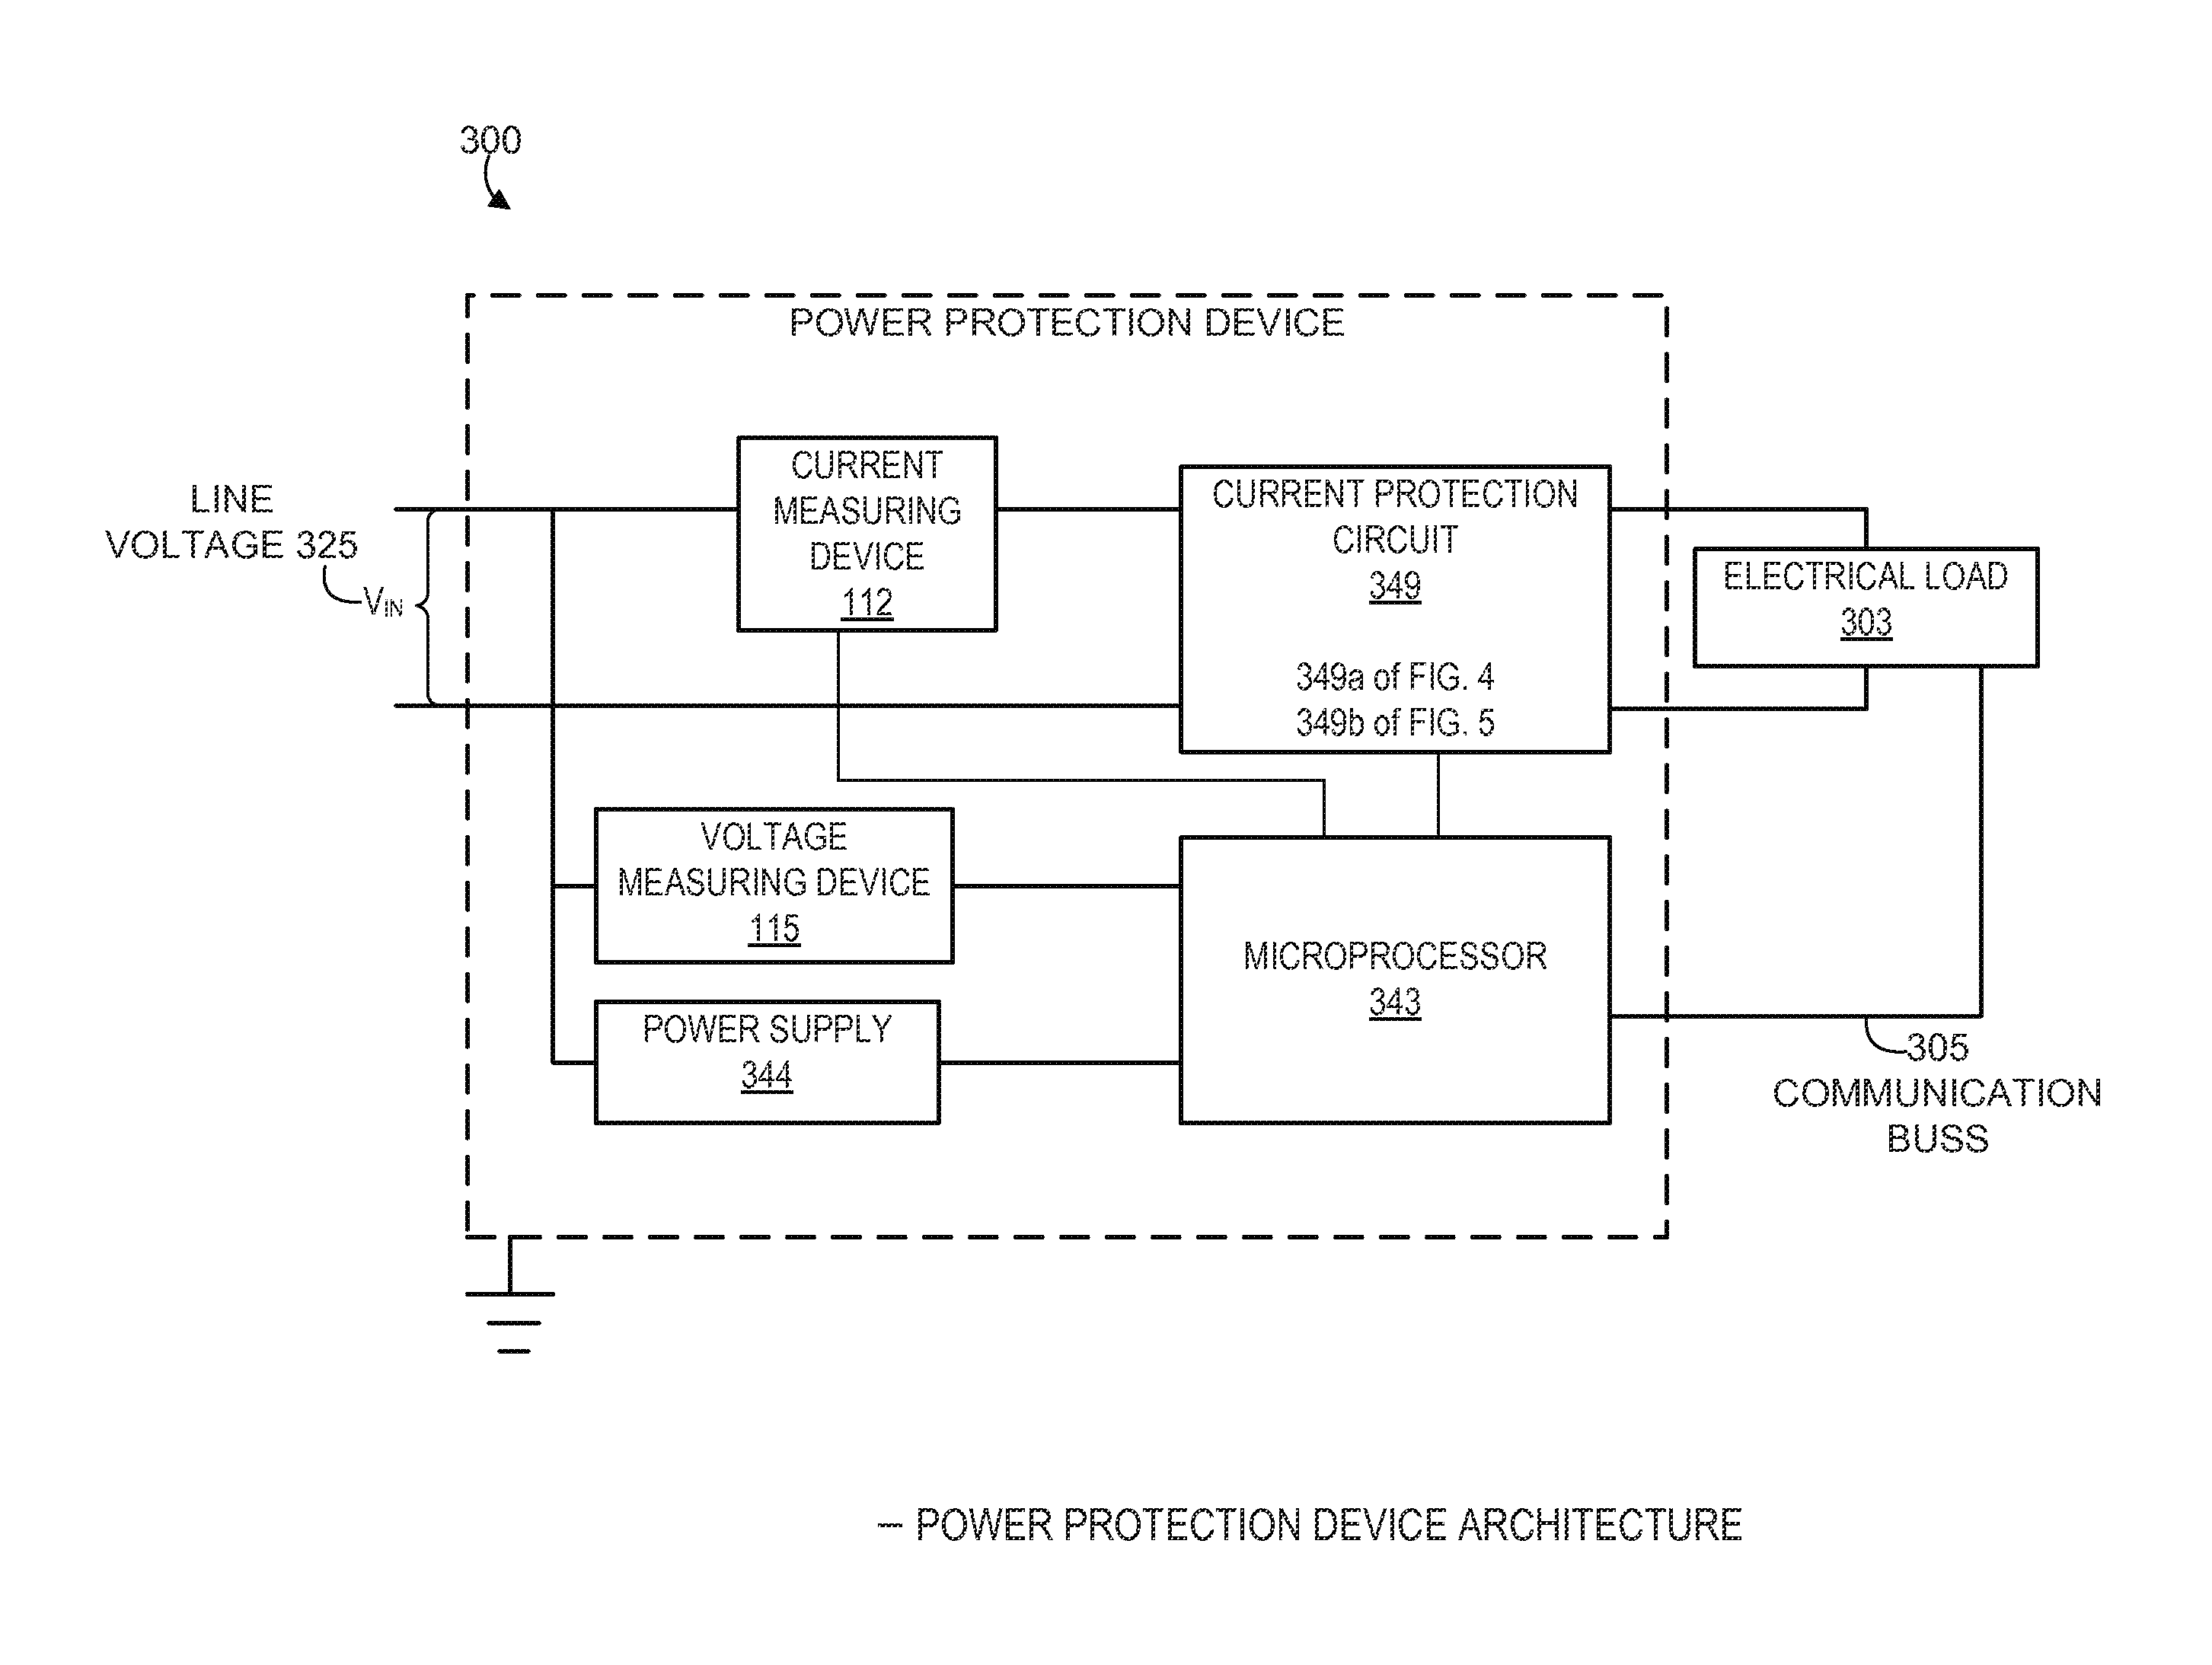 Systems and methods for detecting and determining sources of power disturbances in connection with effective remediation